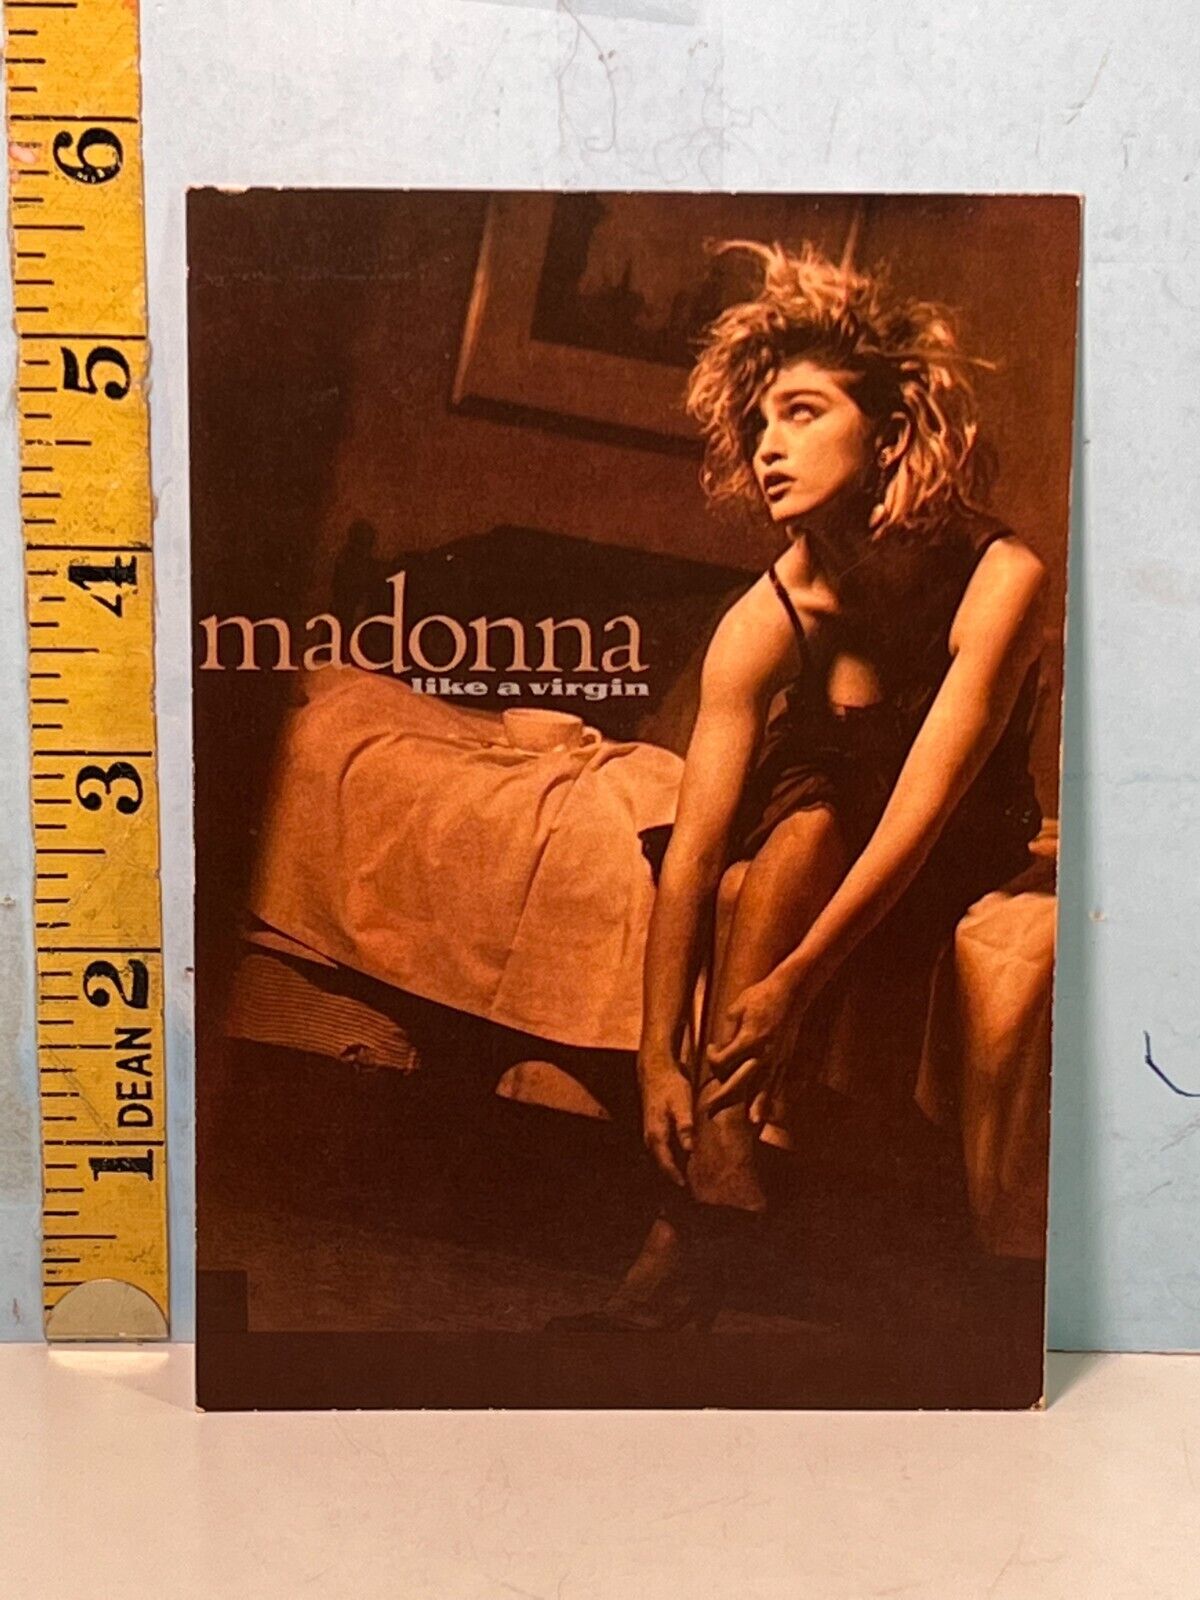 1990\'s Pinup Cheesecake Postcard: Madonna Like a Virger Record 71